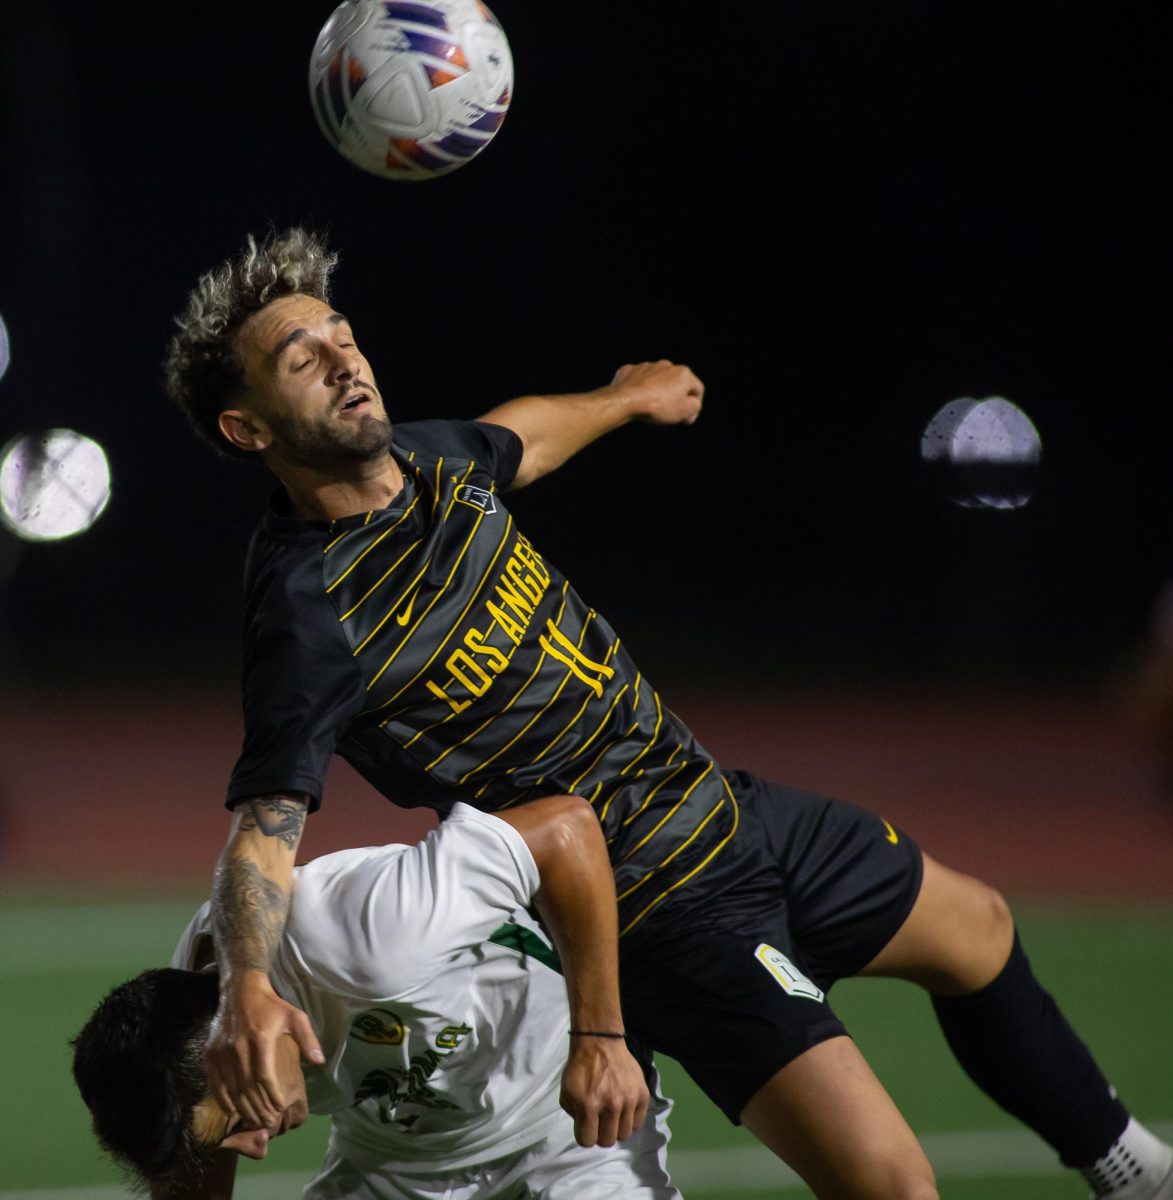 Cal State LA’s Tommaso Belli passes the ball during the Golden Eagles’ 3-1 win over Point Loma at University Stadium on Saturday, September 17, 2023. Cal State LA improves their record to 5-0, with their next game taking place next Saturday against Cal State Dominguez Hills at Dignity Health Sports Park.